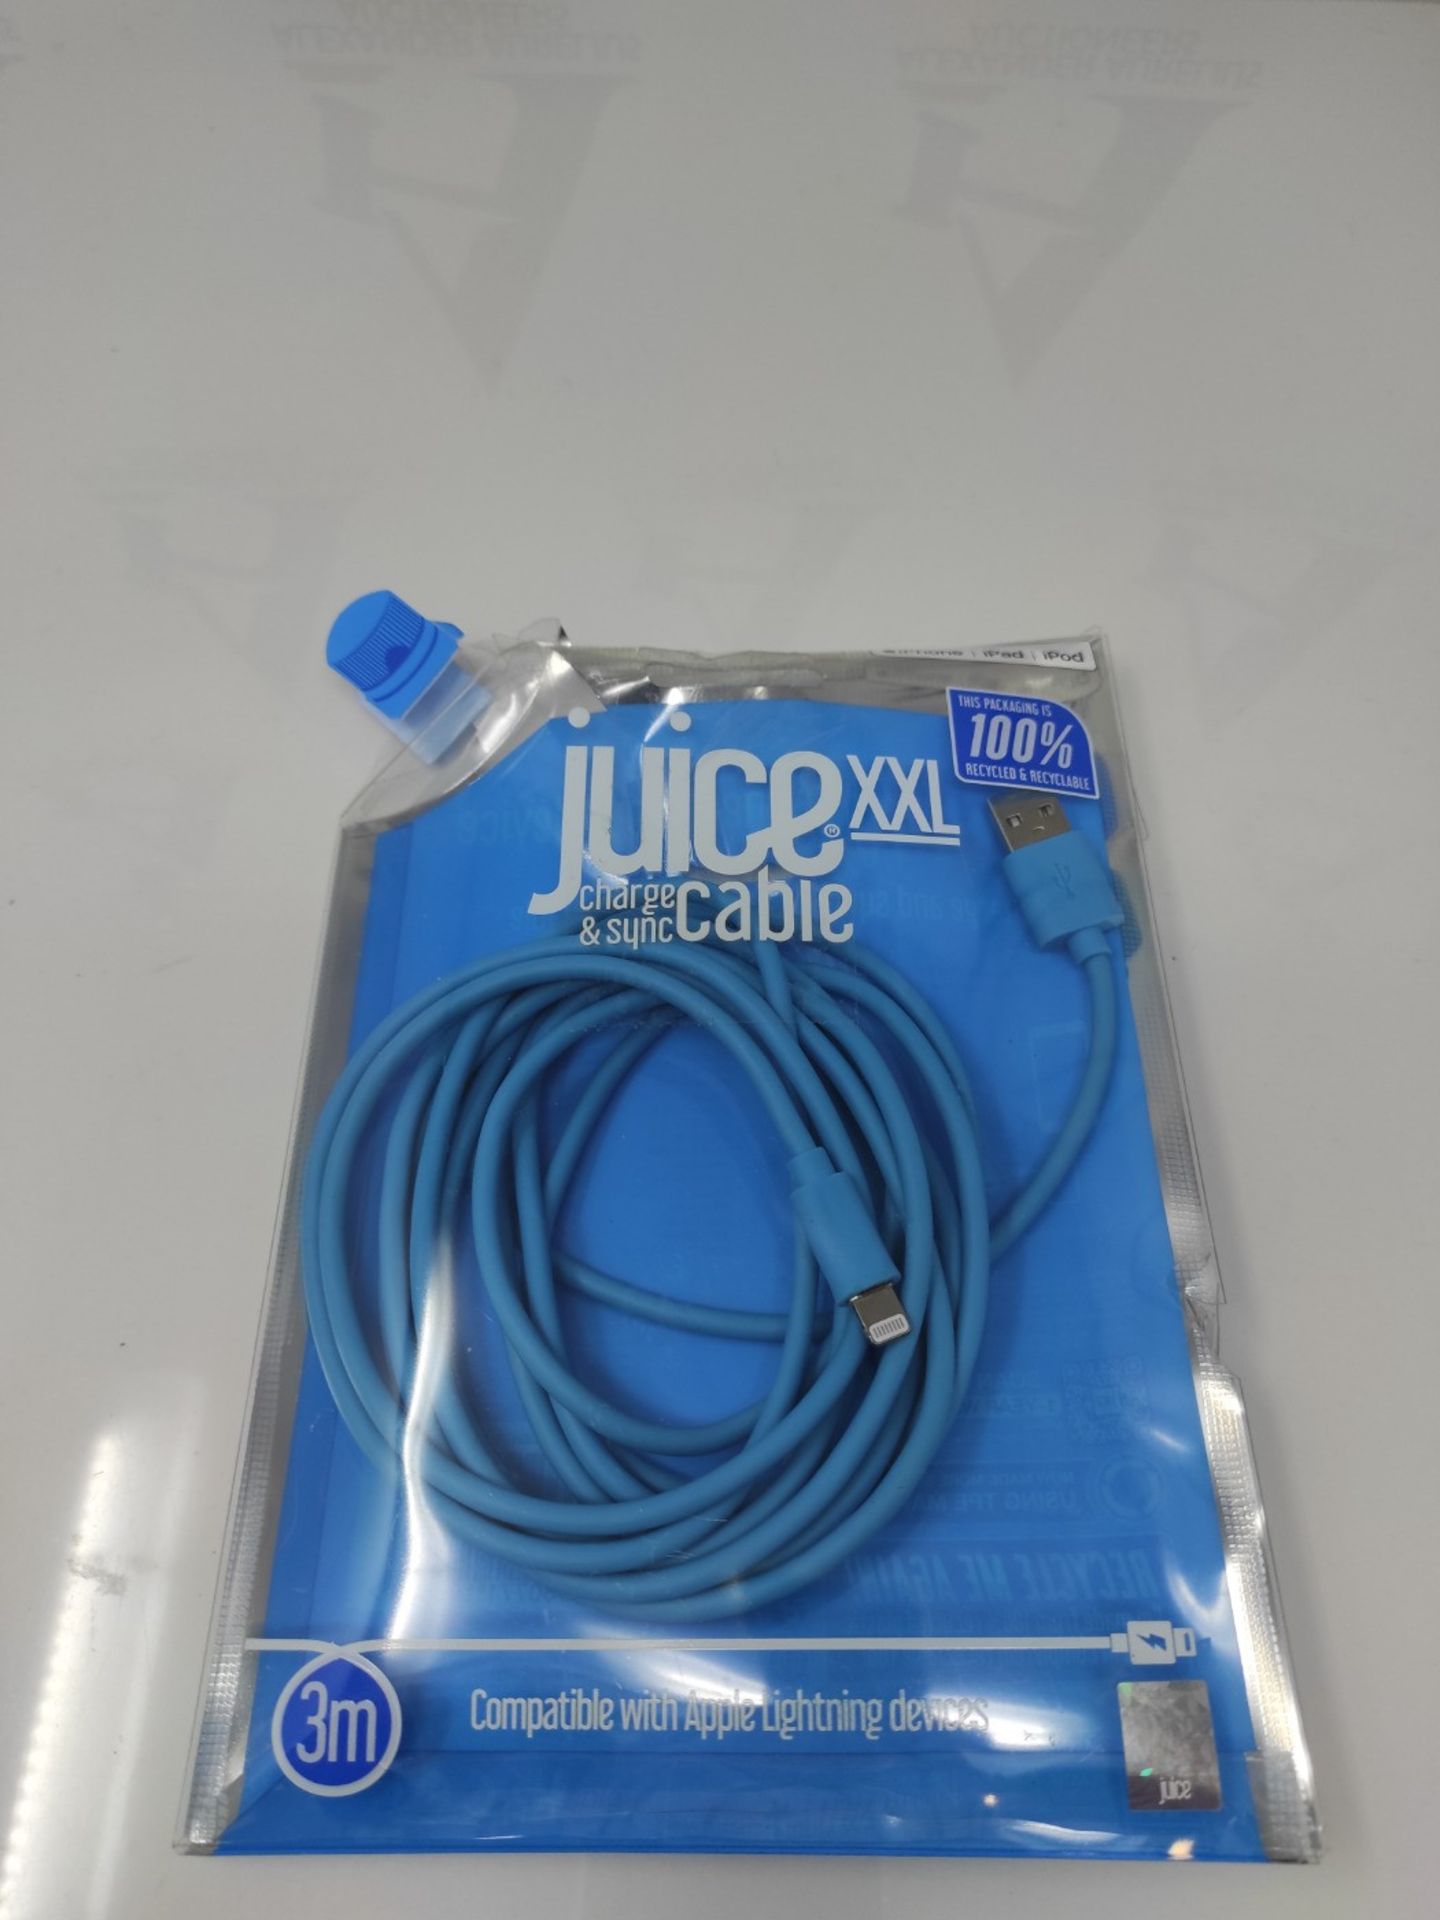 Juice Apple iPhone Lightning 3m Charger and Sync Cable for Apple iPhone 13, 13 Pro, 12 - Image 2 of 2